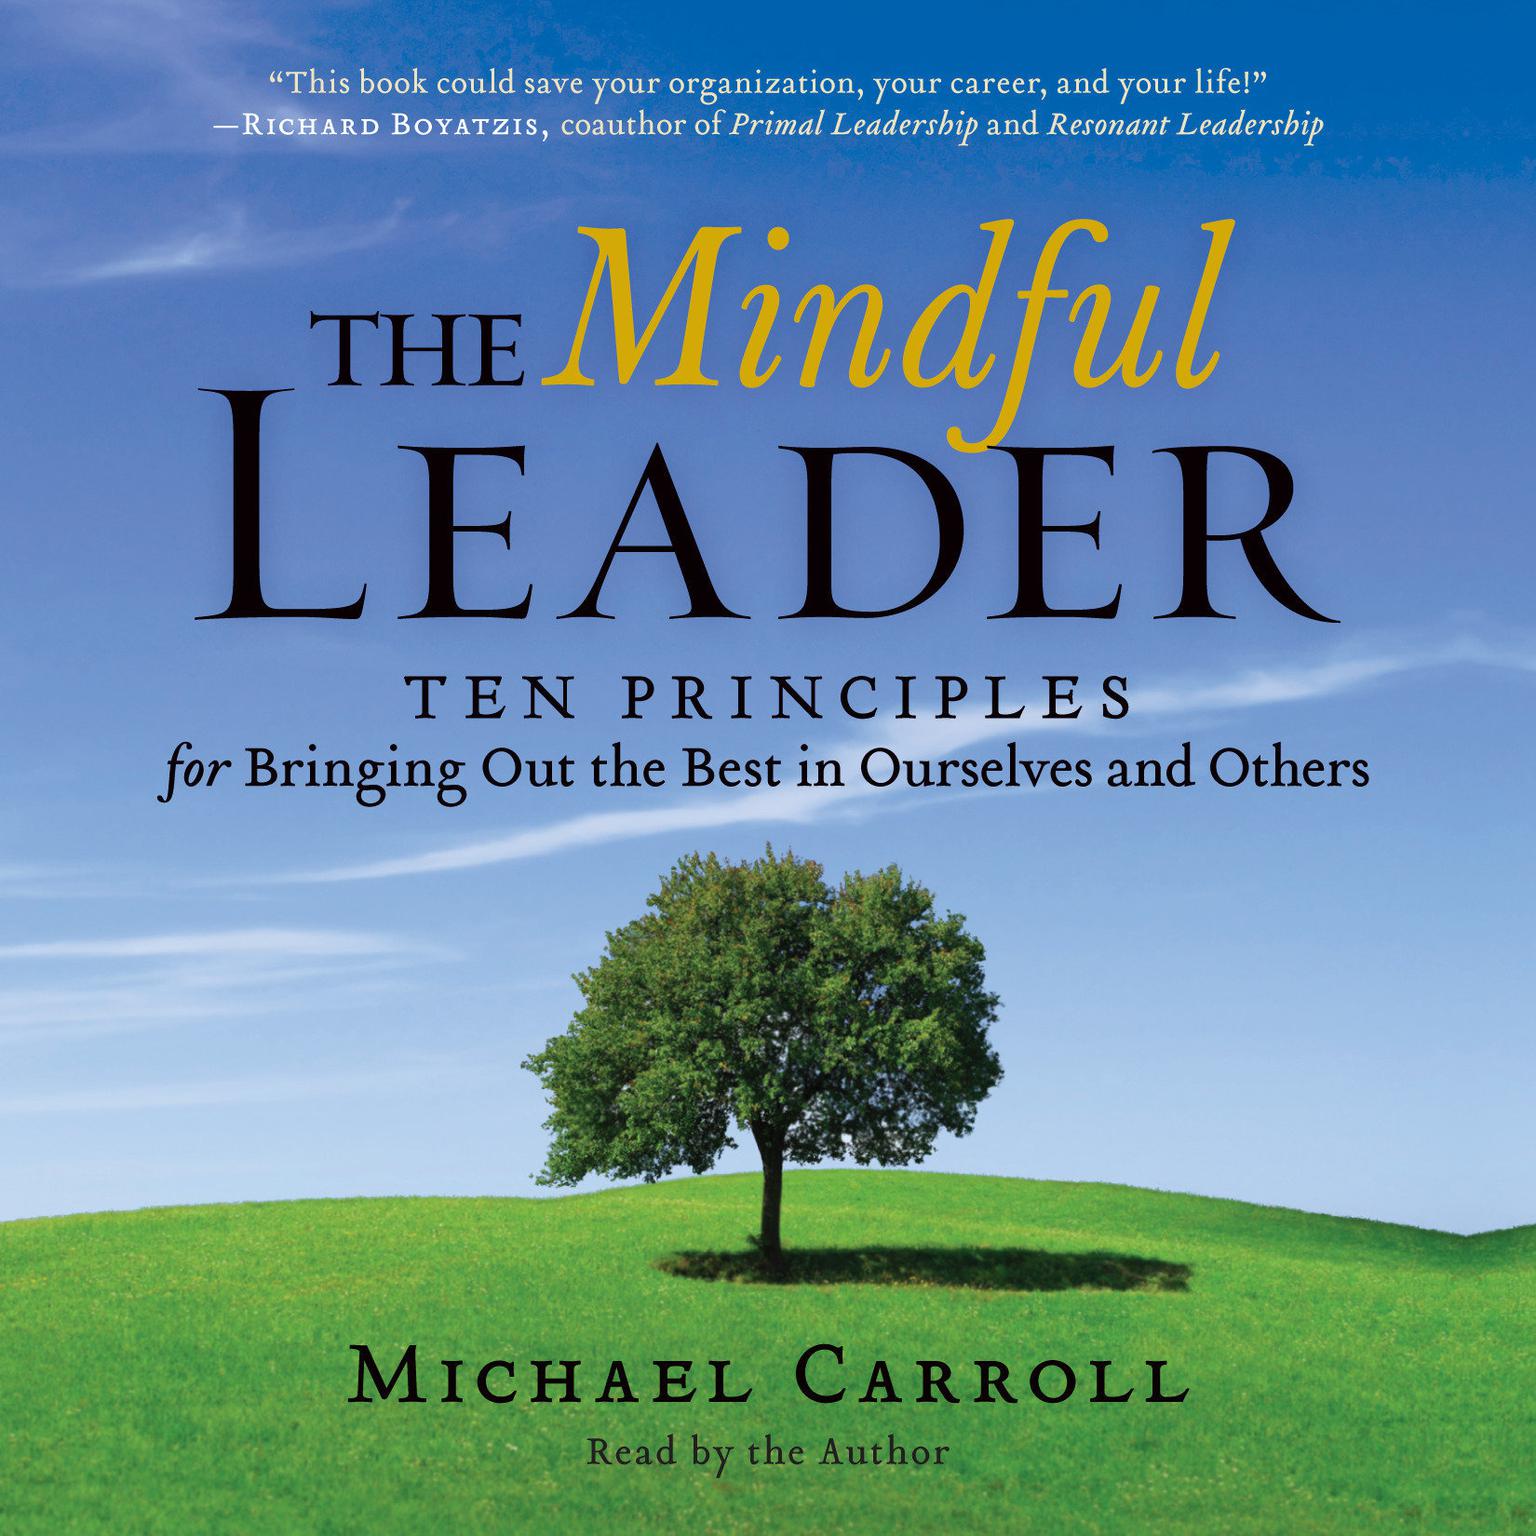 The Mindful Leader: Ten Principles for Bringing Out the Best in Ourselves and Others Audiobook, by Michael Carroll